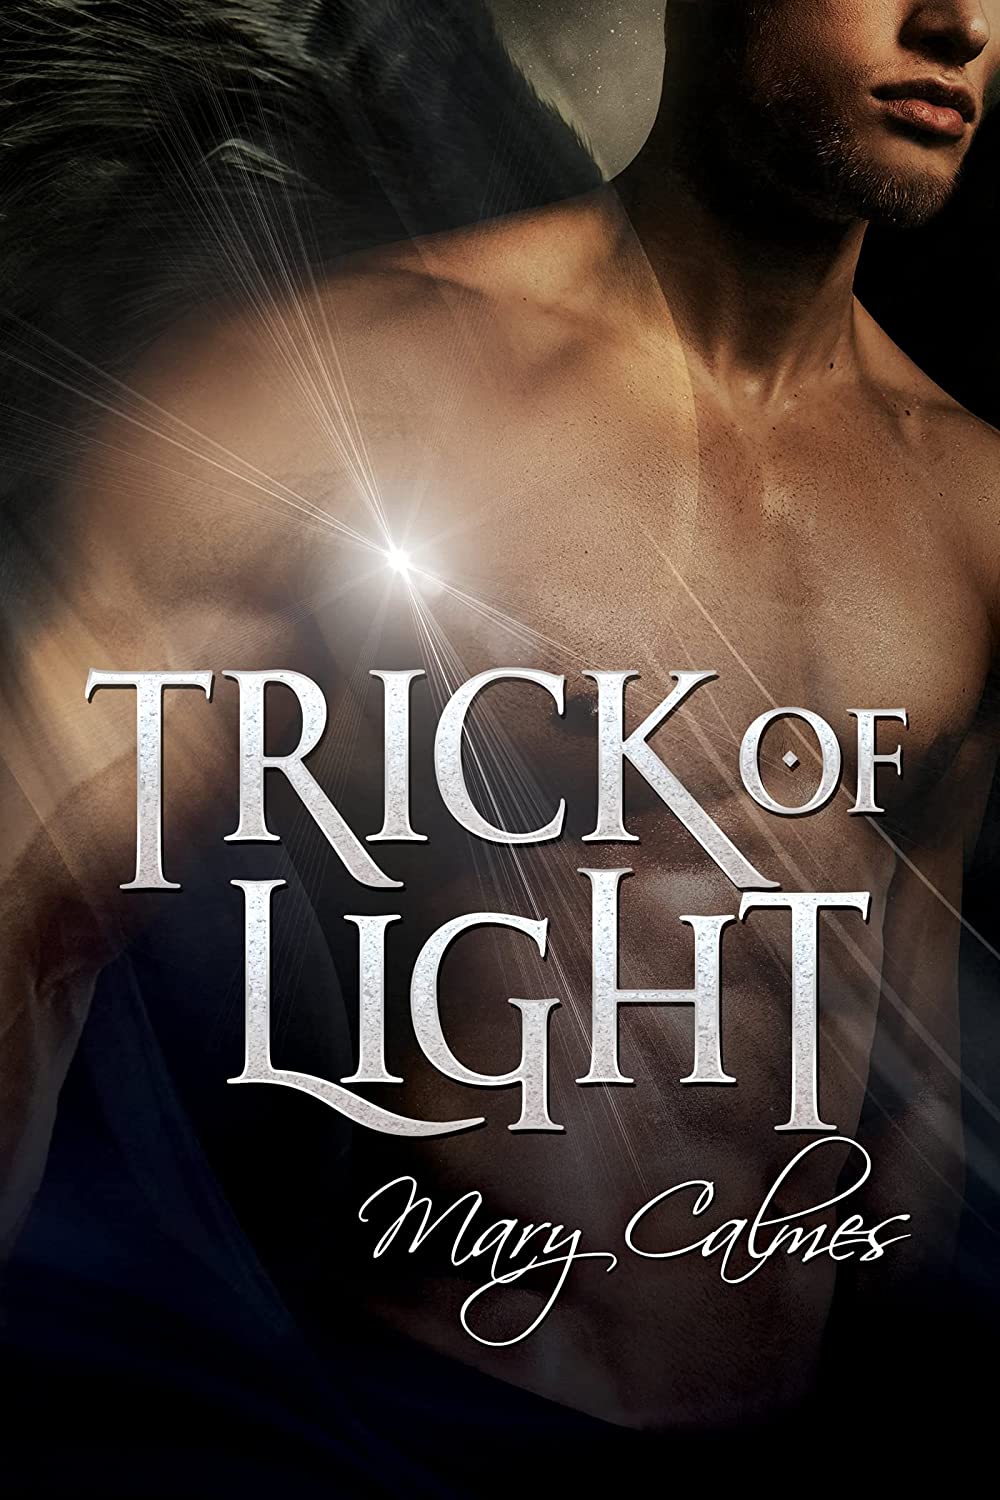 Trick Of Light by Mary Calmes PDF Download